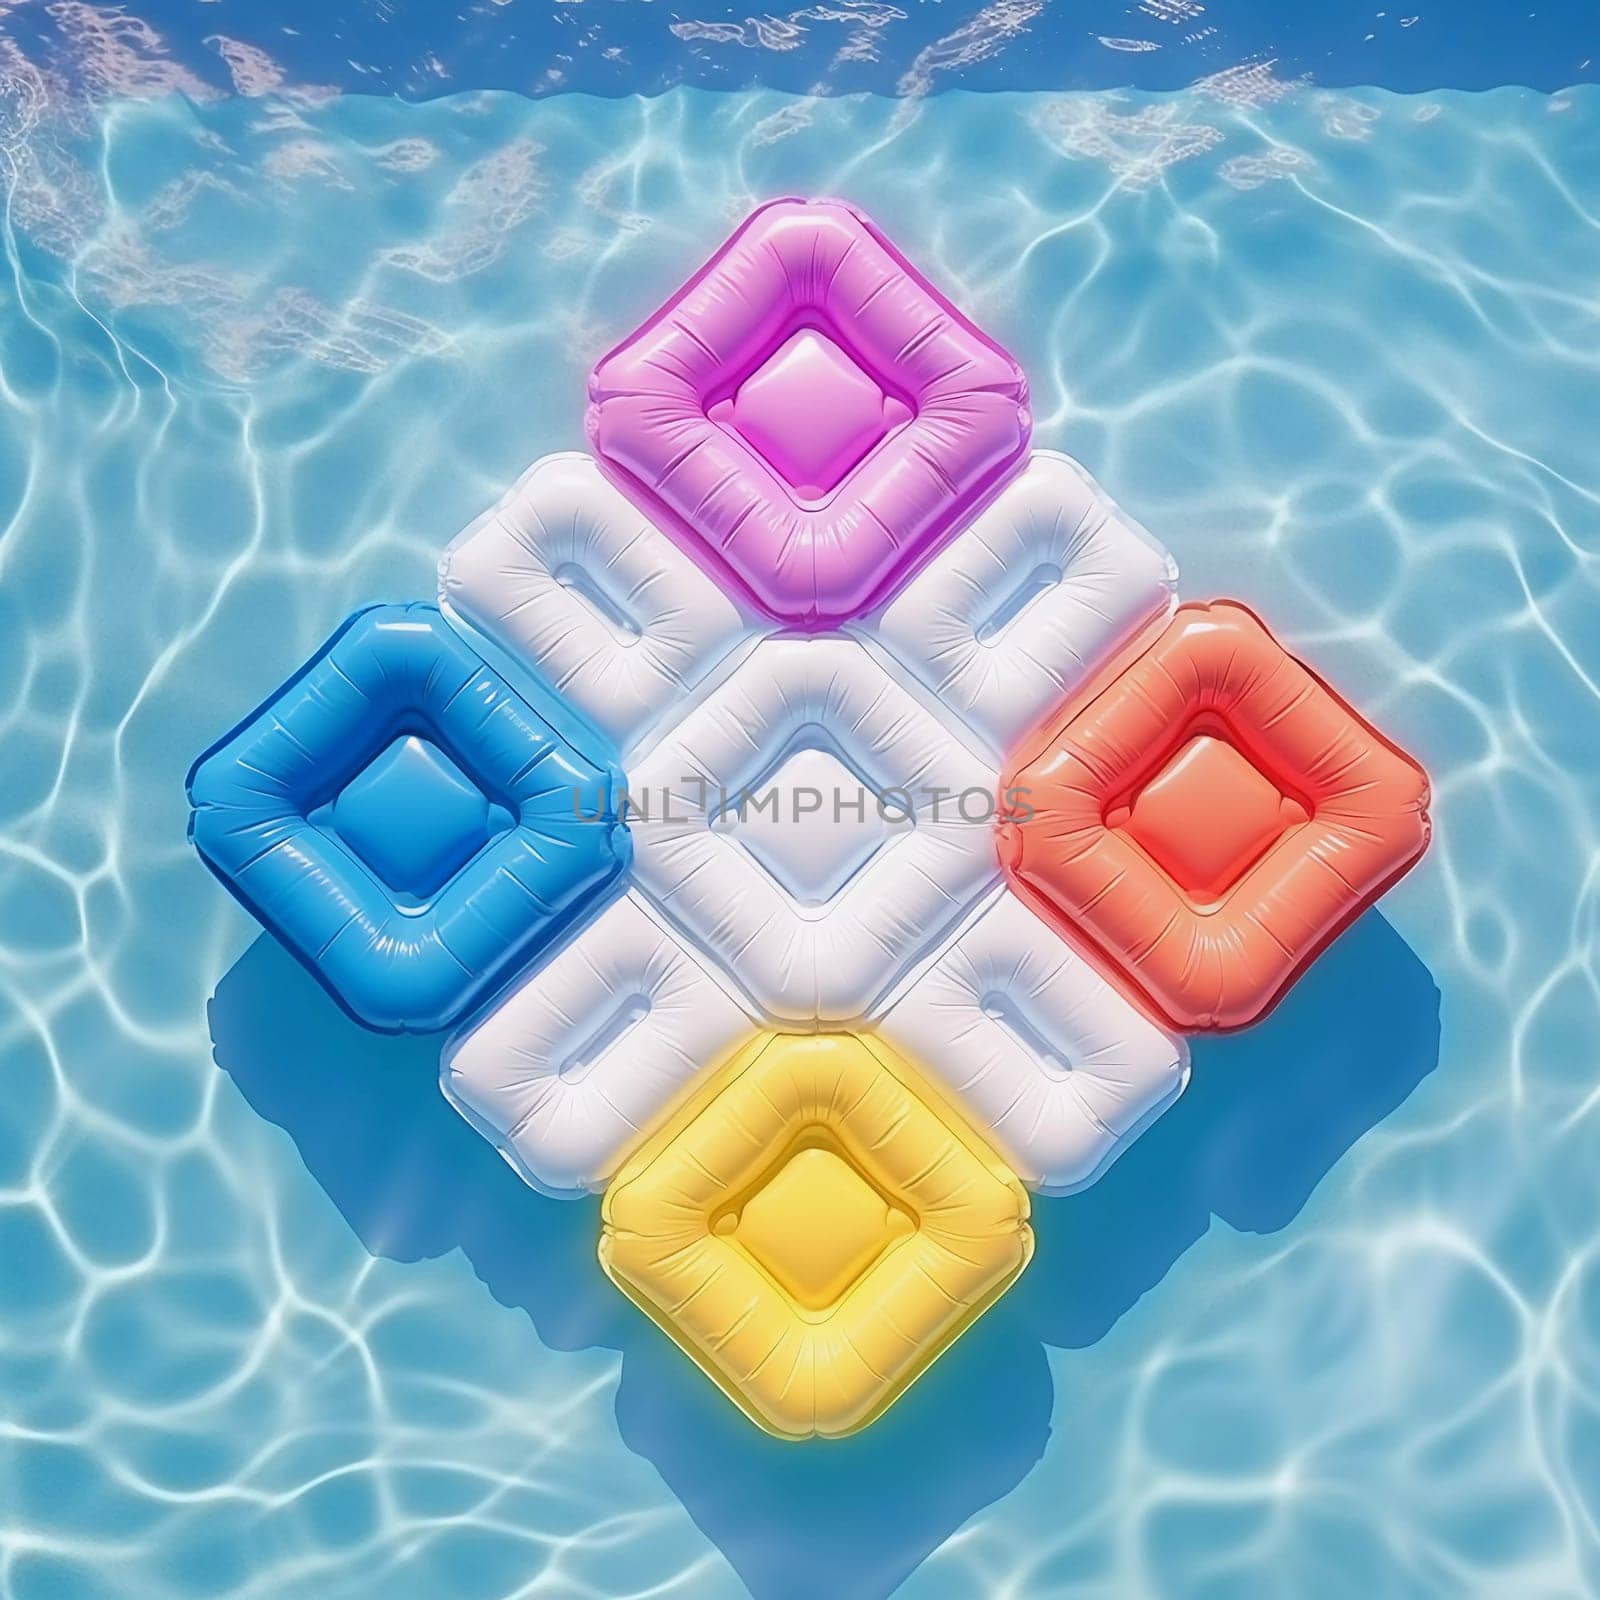 Square Colorful Air Mattress by voysla